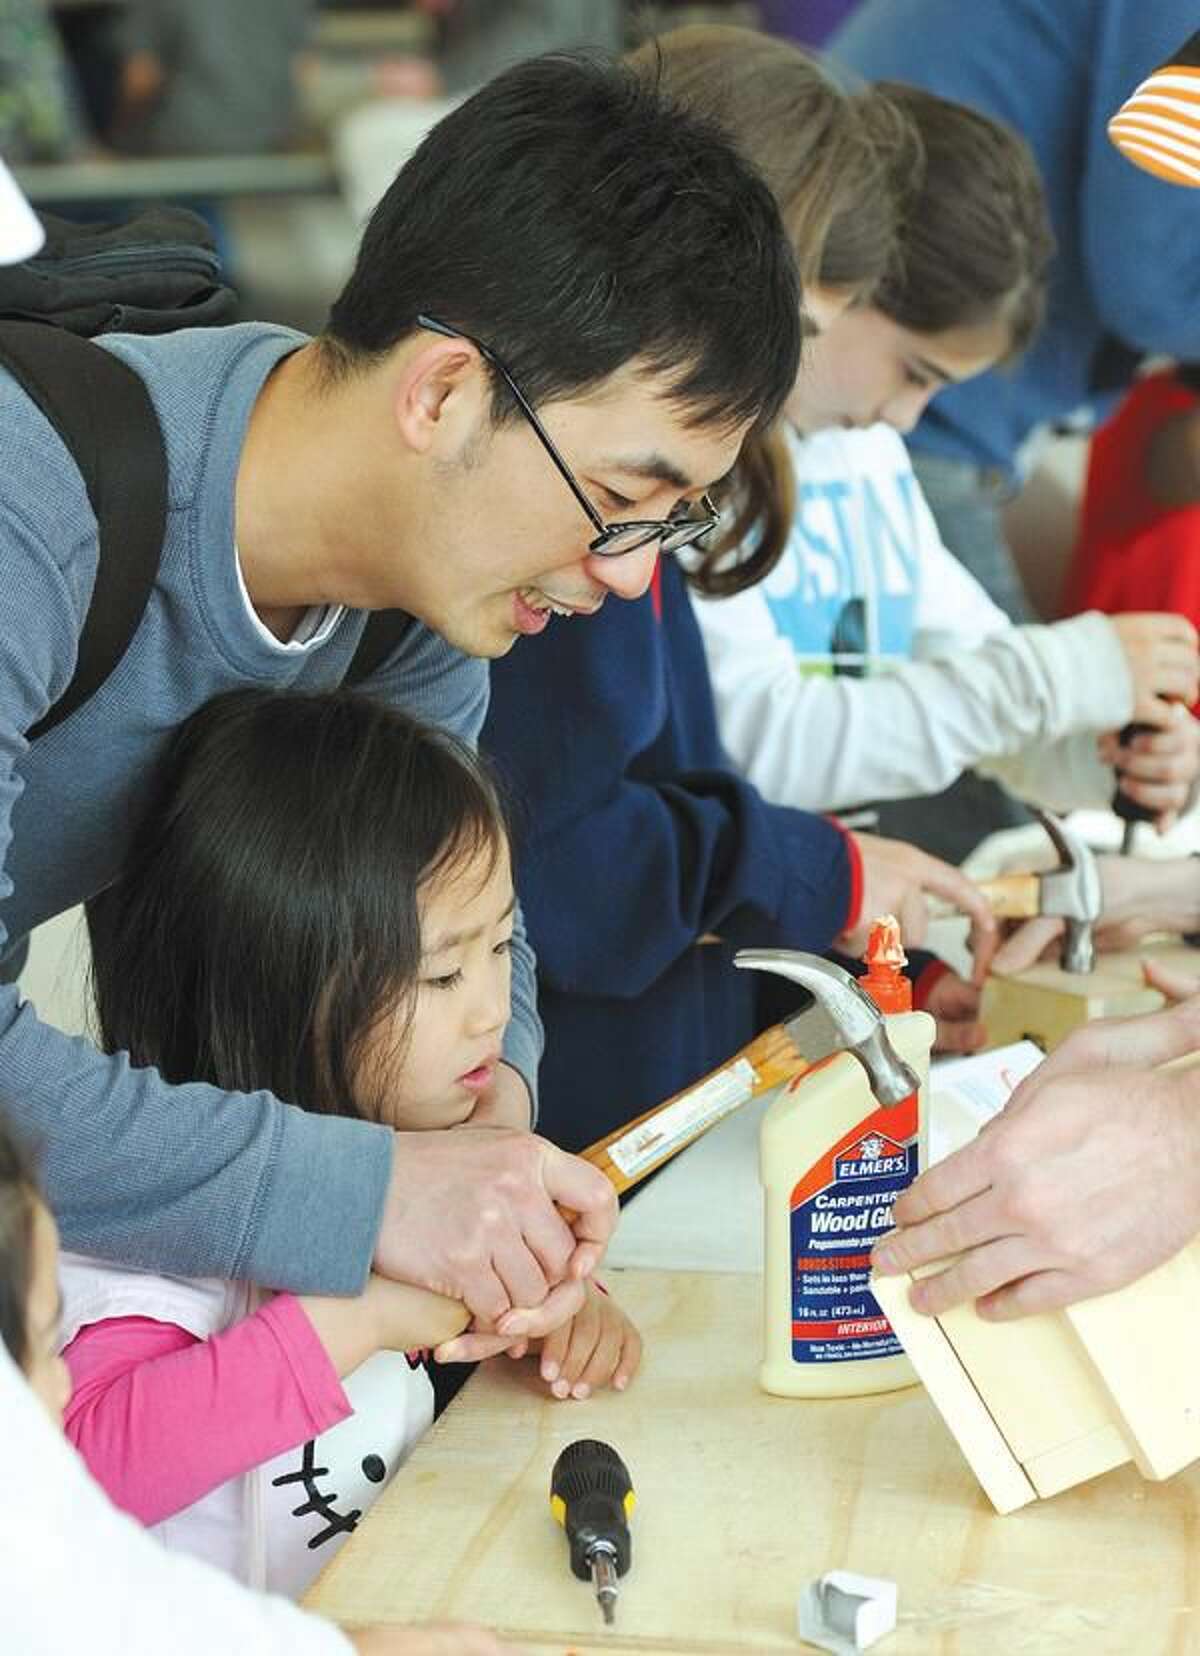 Photo by Peter Casolino 4-Year-old Vivian Niu gets a hand from her father, Heng Yao Niu as they build a birdhouse at the Hamden Earth Day Celebration at Hamden Middle School.